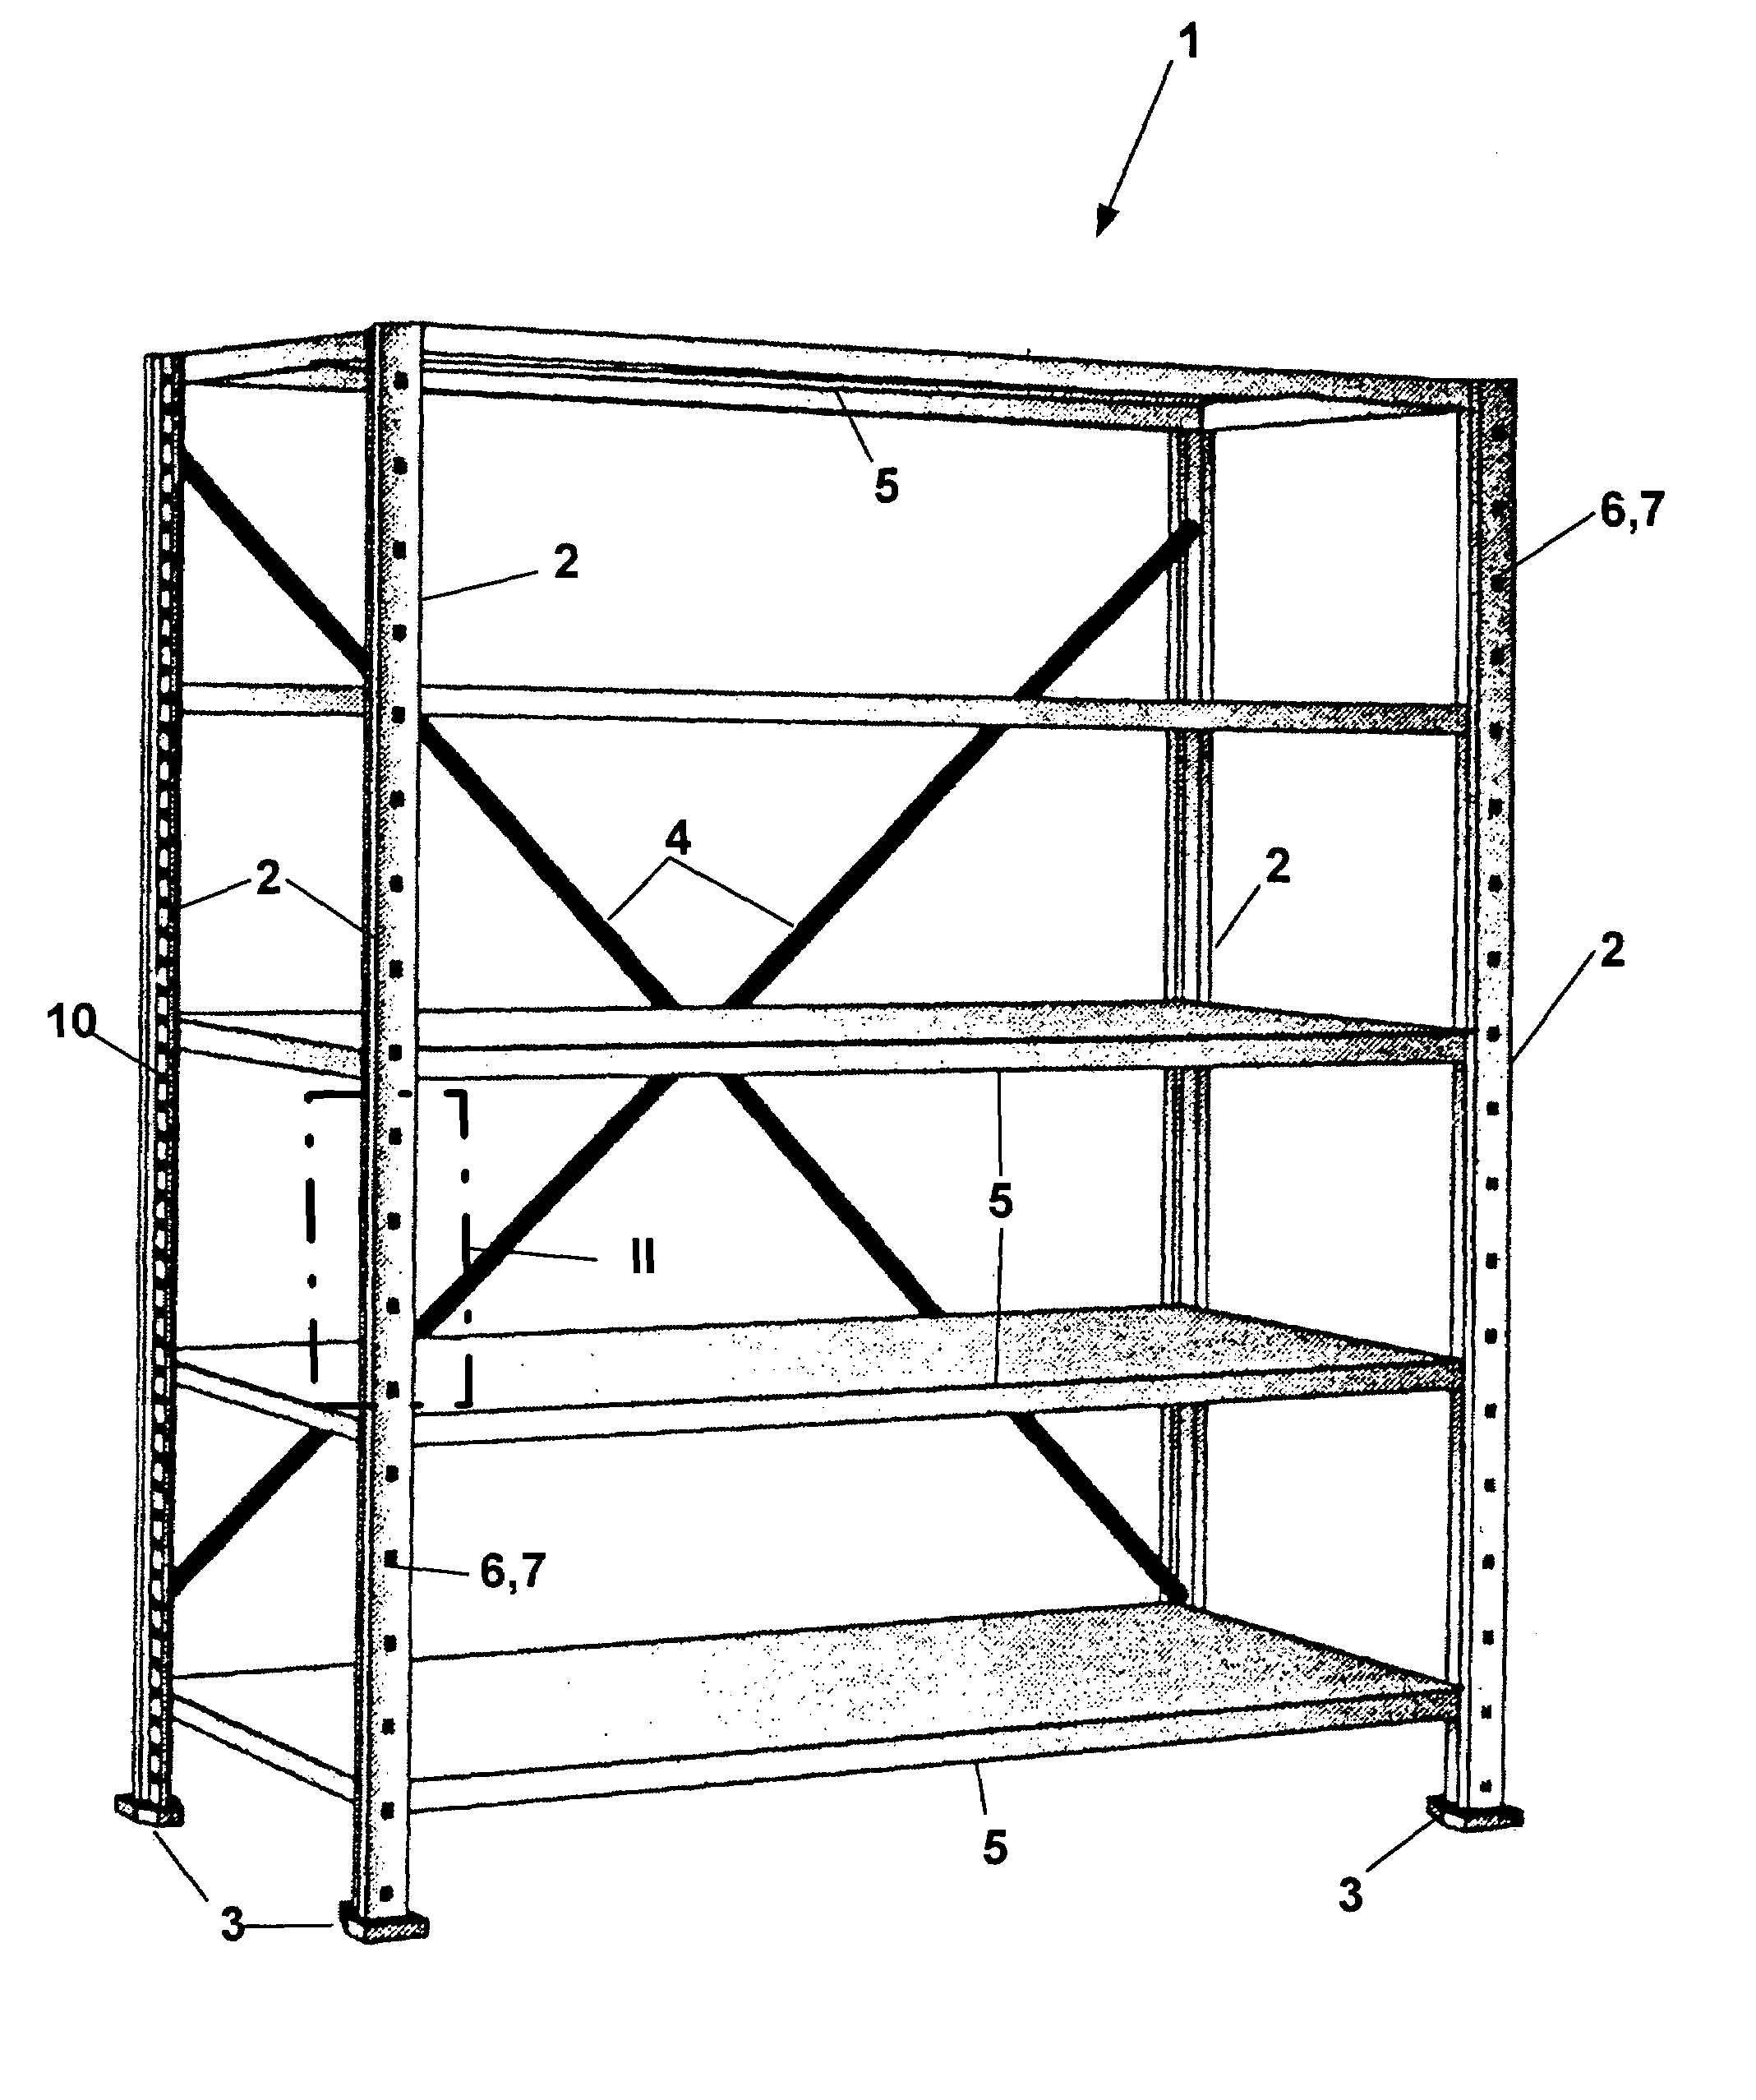 Shelf system for storage and filing of objects